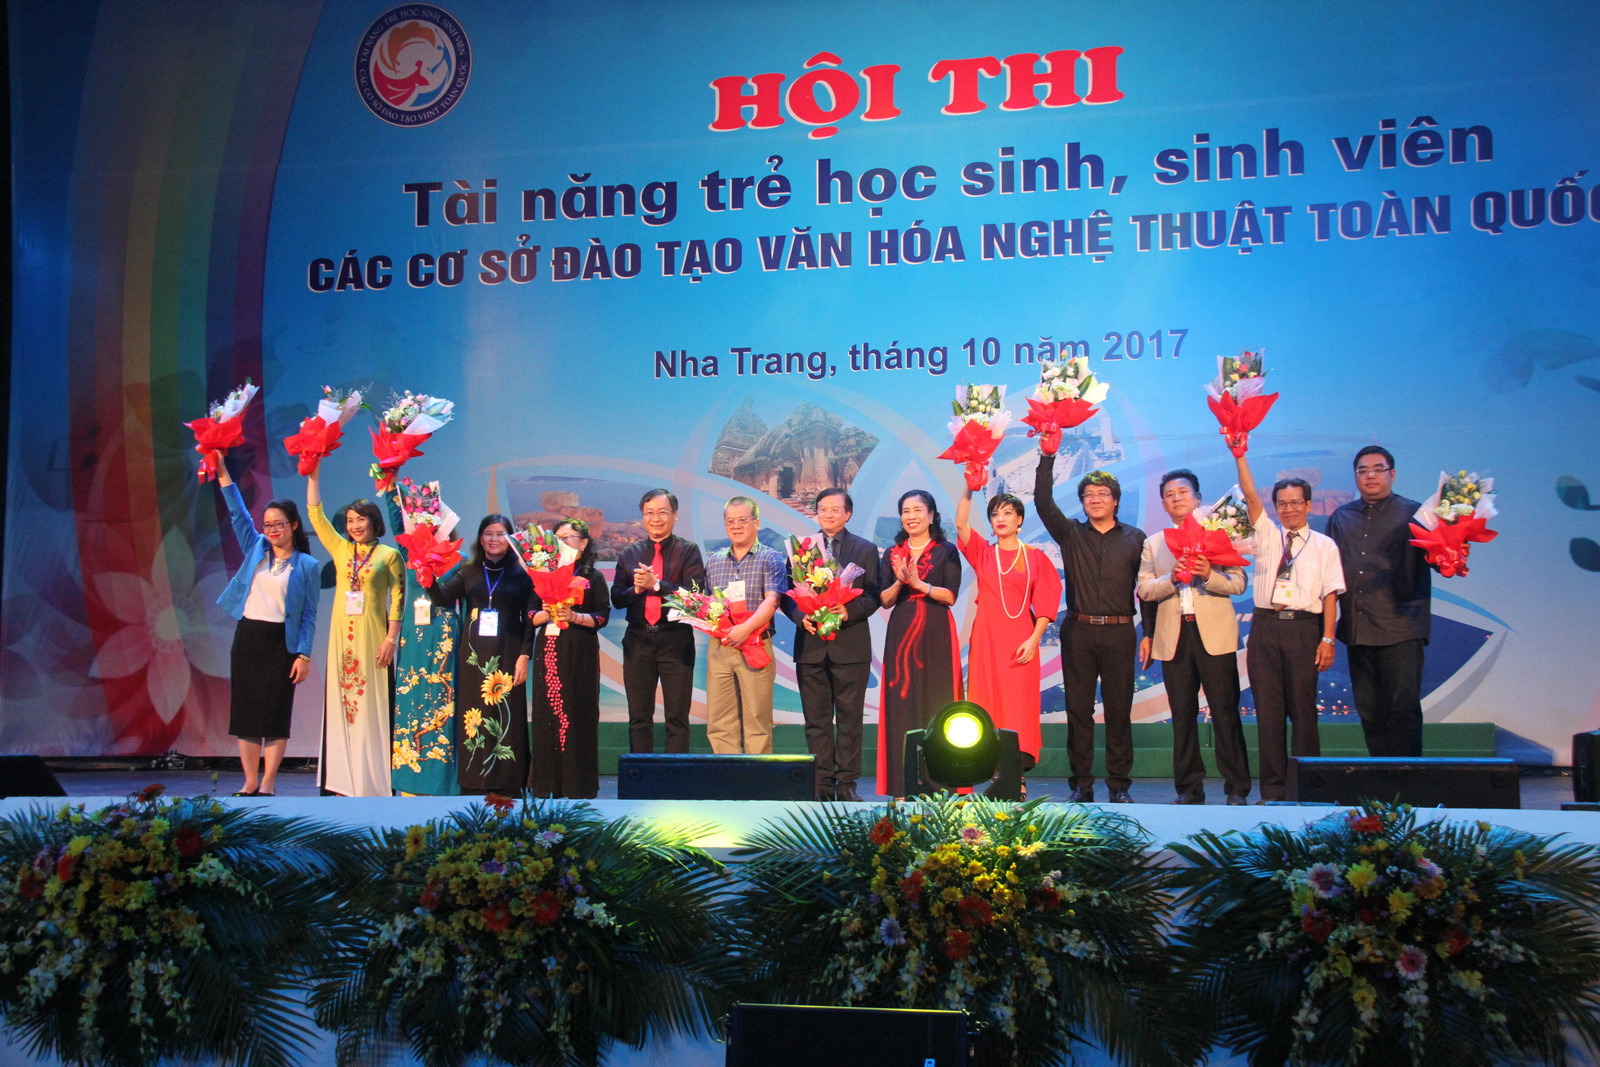 Leaders of the Ministry of Culture, Sports and Tourism and Khanh Hoa Province offering flowers to the jury.